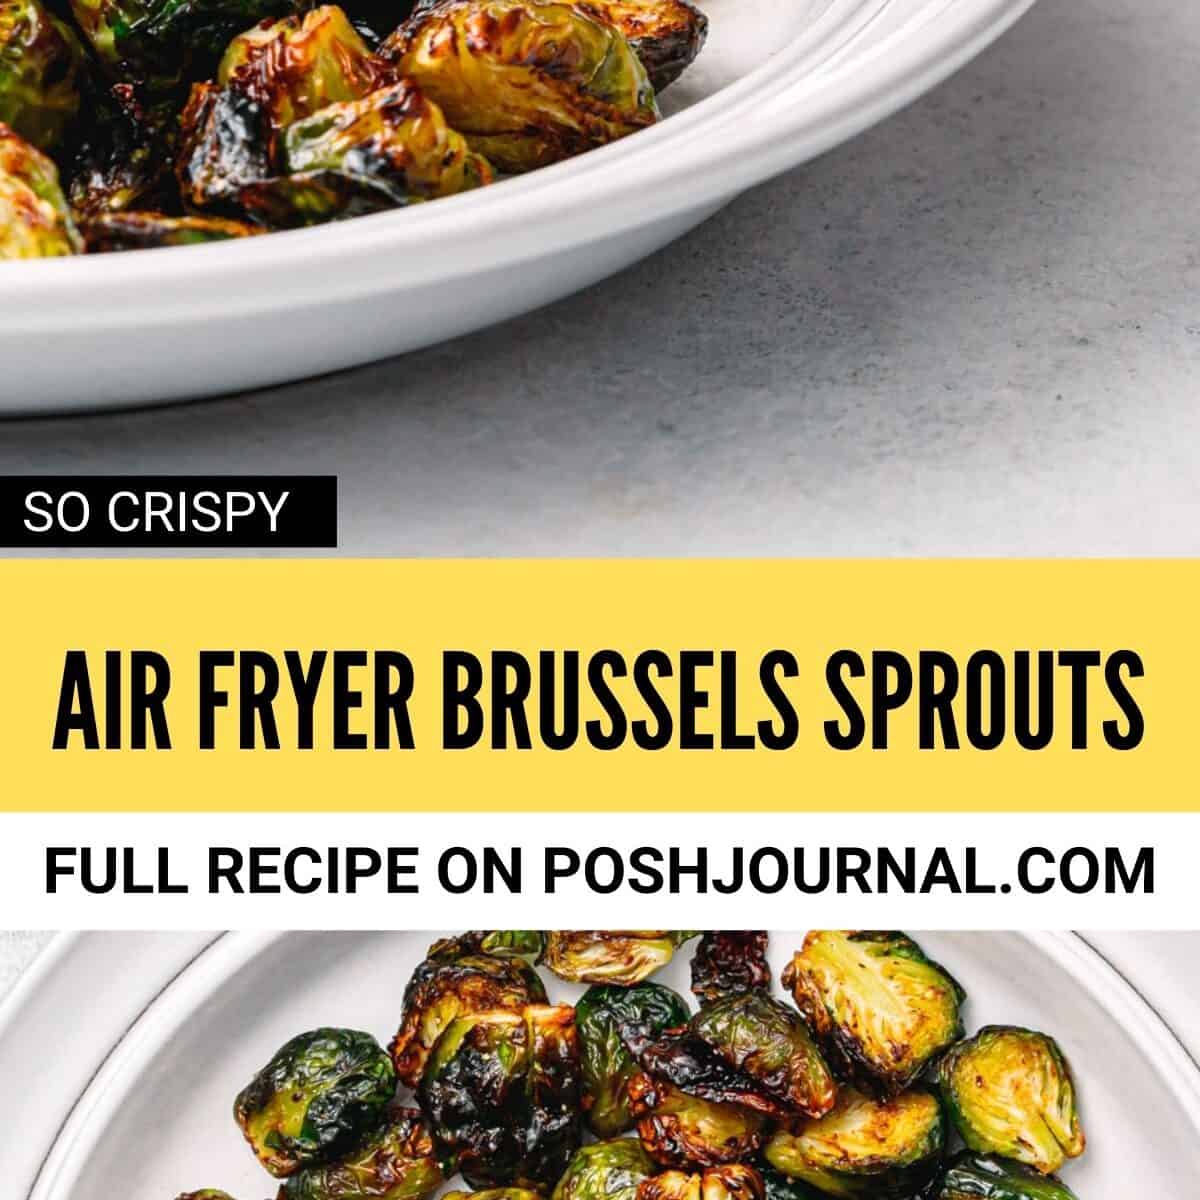 Air fryer brussels sprouts recipe